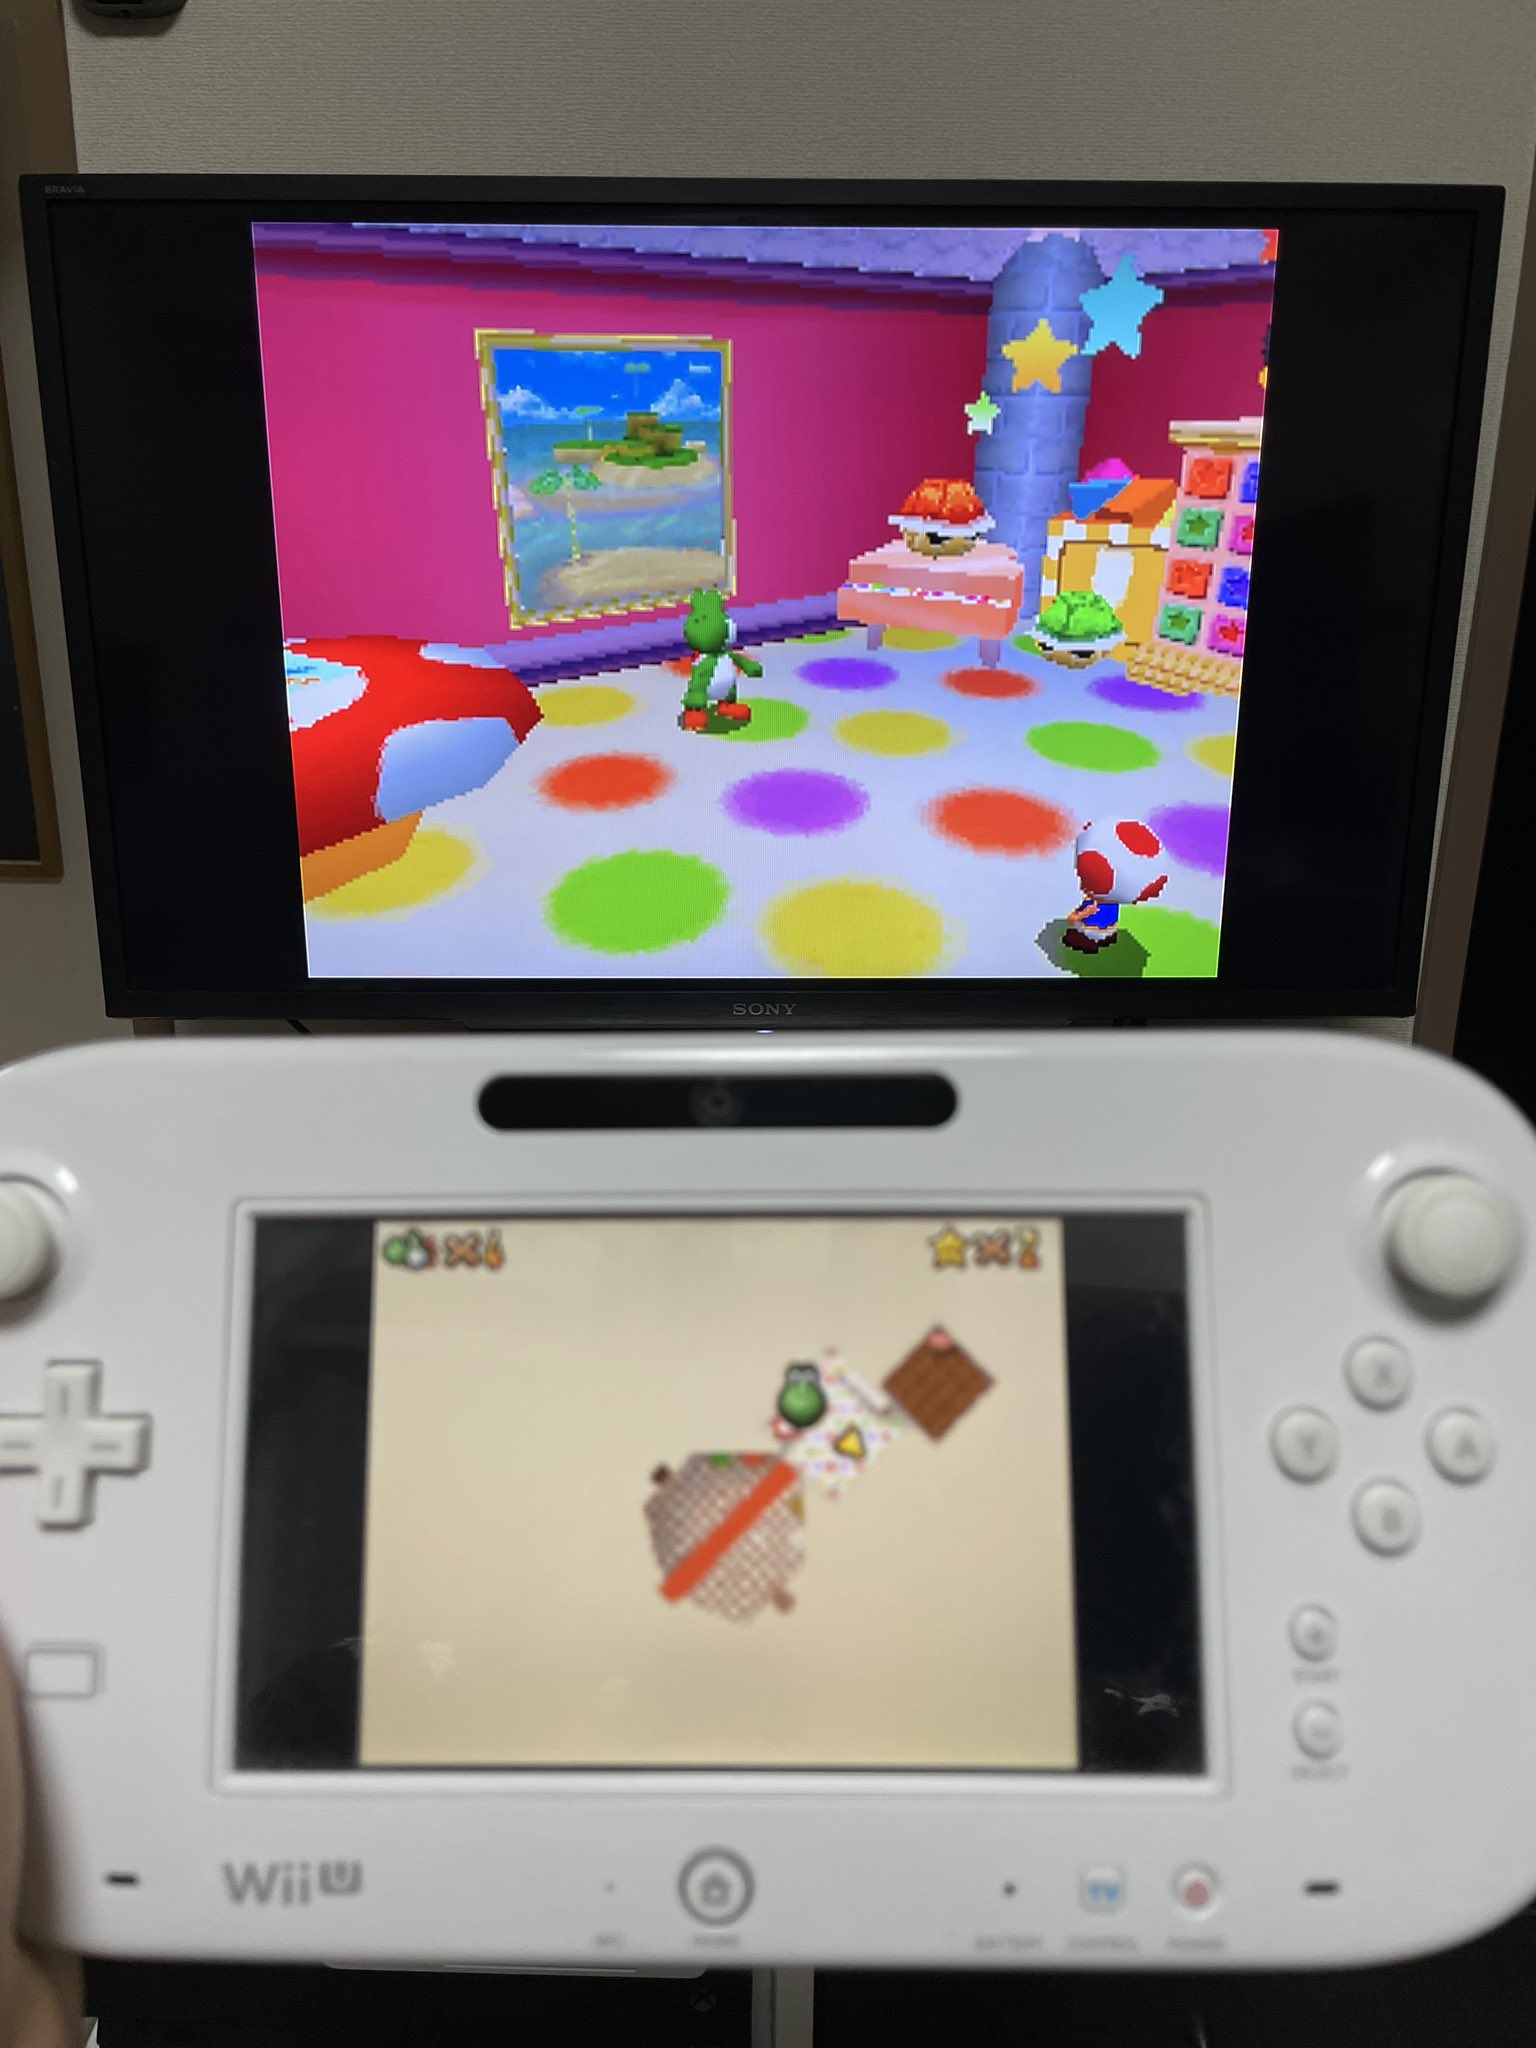 Nintendo adds N64 and DS games to Wii U Virtual Console – Eggplante!